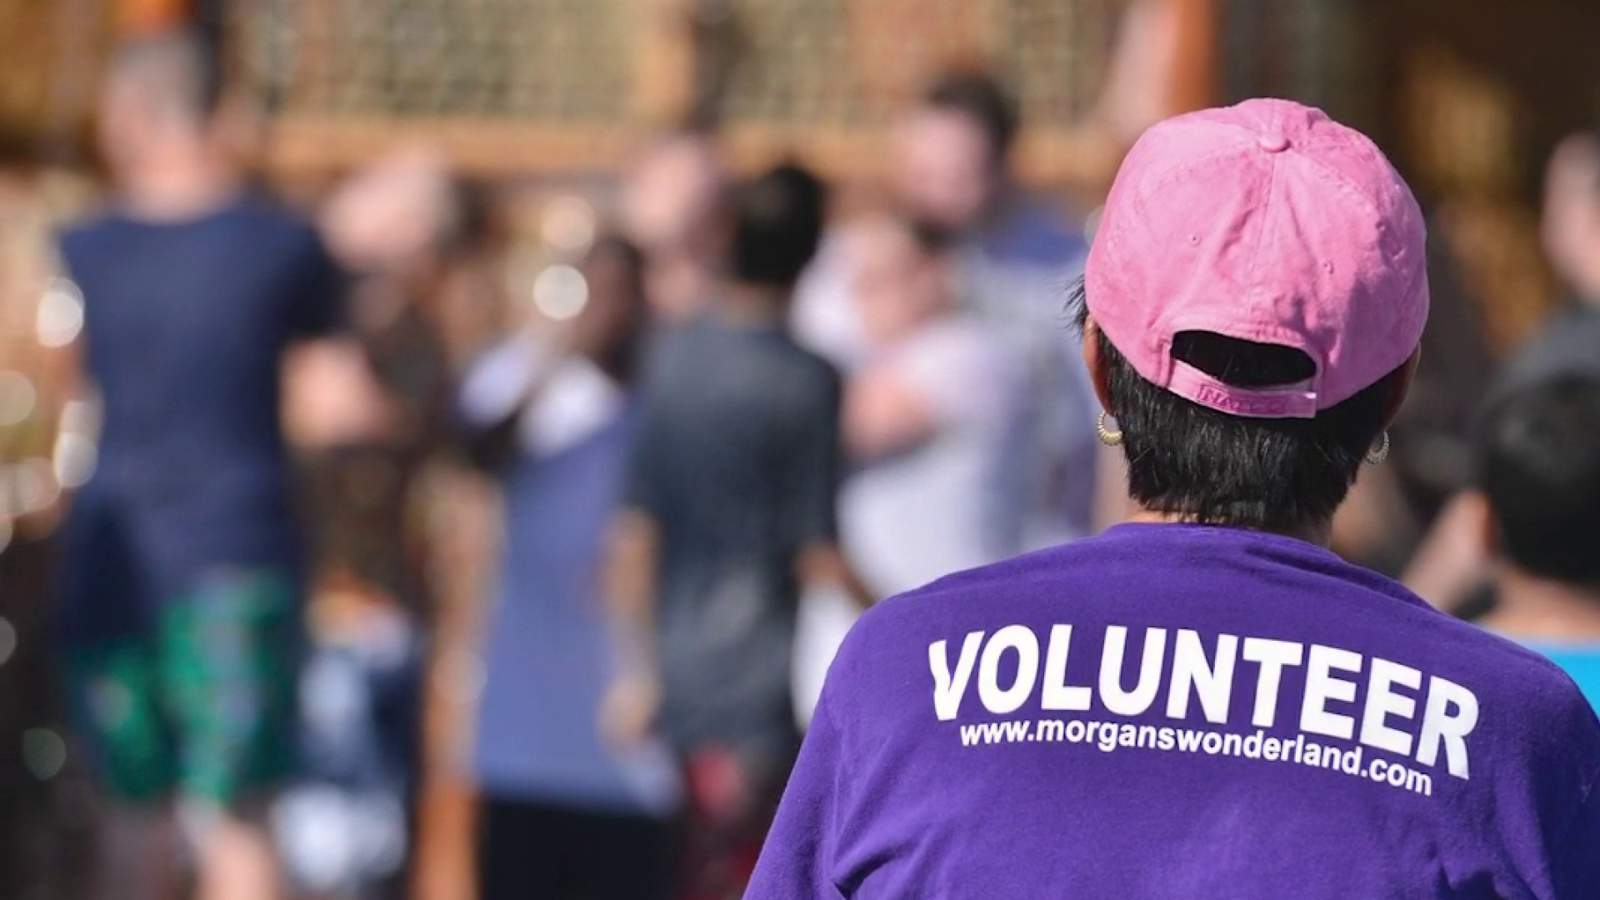 Interested in volunteering? This inclusive nonprofit could use your help